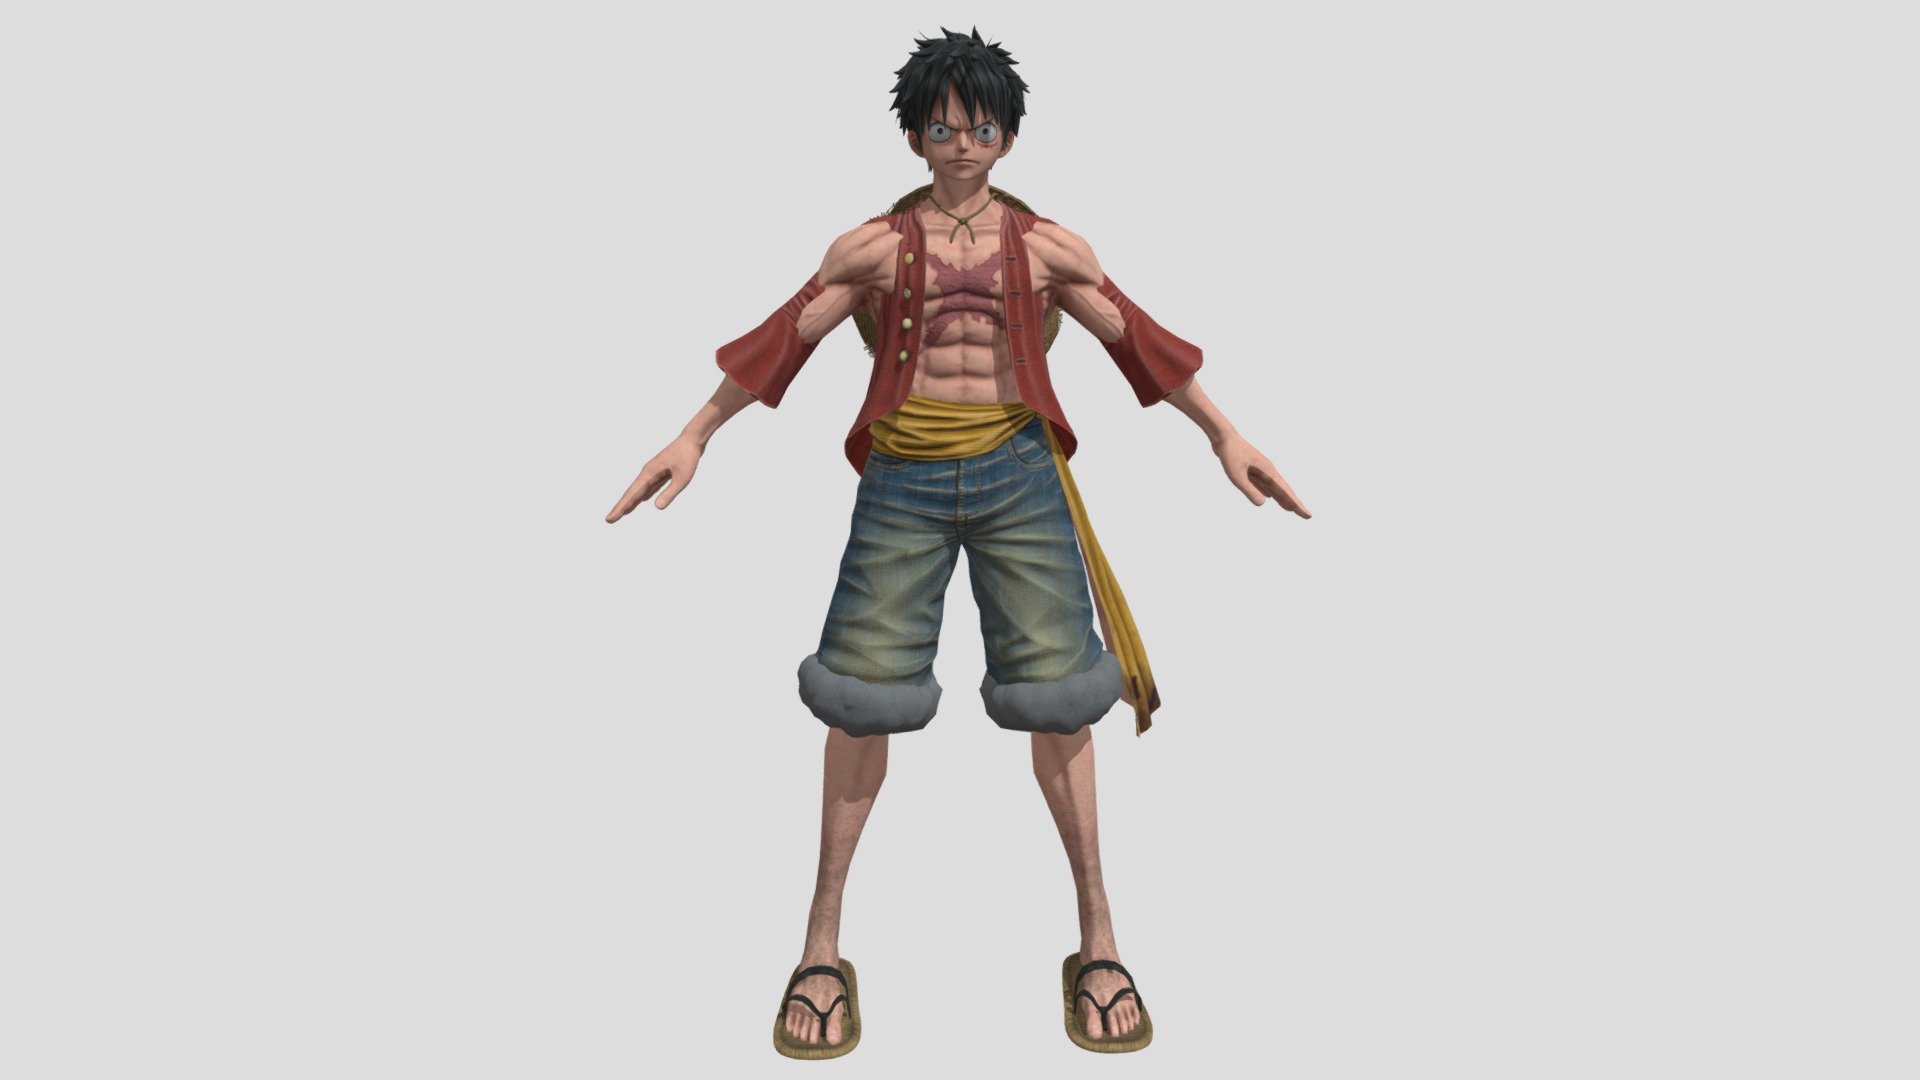 if you like I will upload another character again,
Please subscribe my Youtube Channel and you can request model https://www.youtube.com/channel/UCLxp-WJyZvmrCBUFNorOf6w - Monkey D Luffy Damage - One Piece - Download Free 3D model by Qowi Arts (@qowiiskandar) 3d model